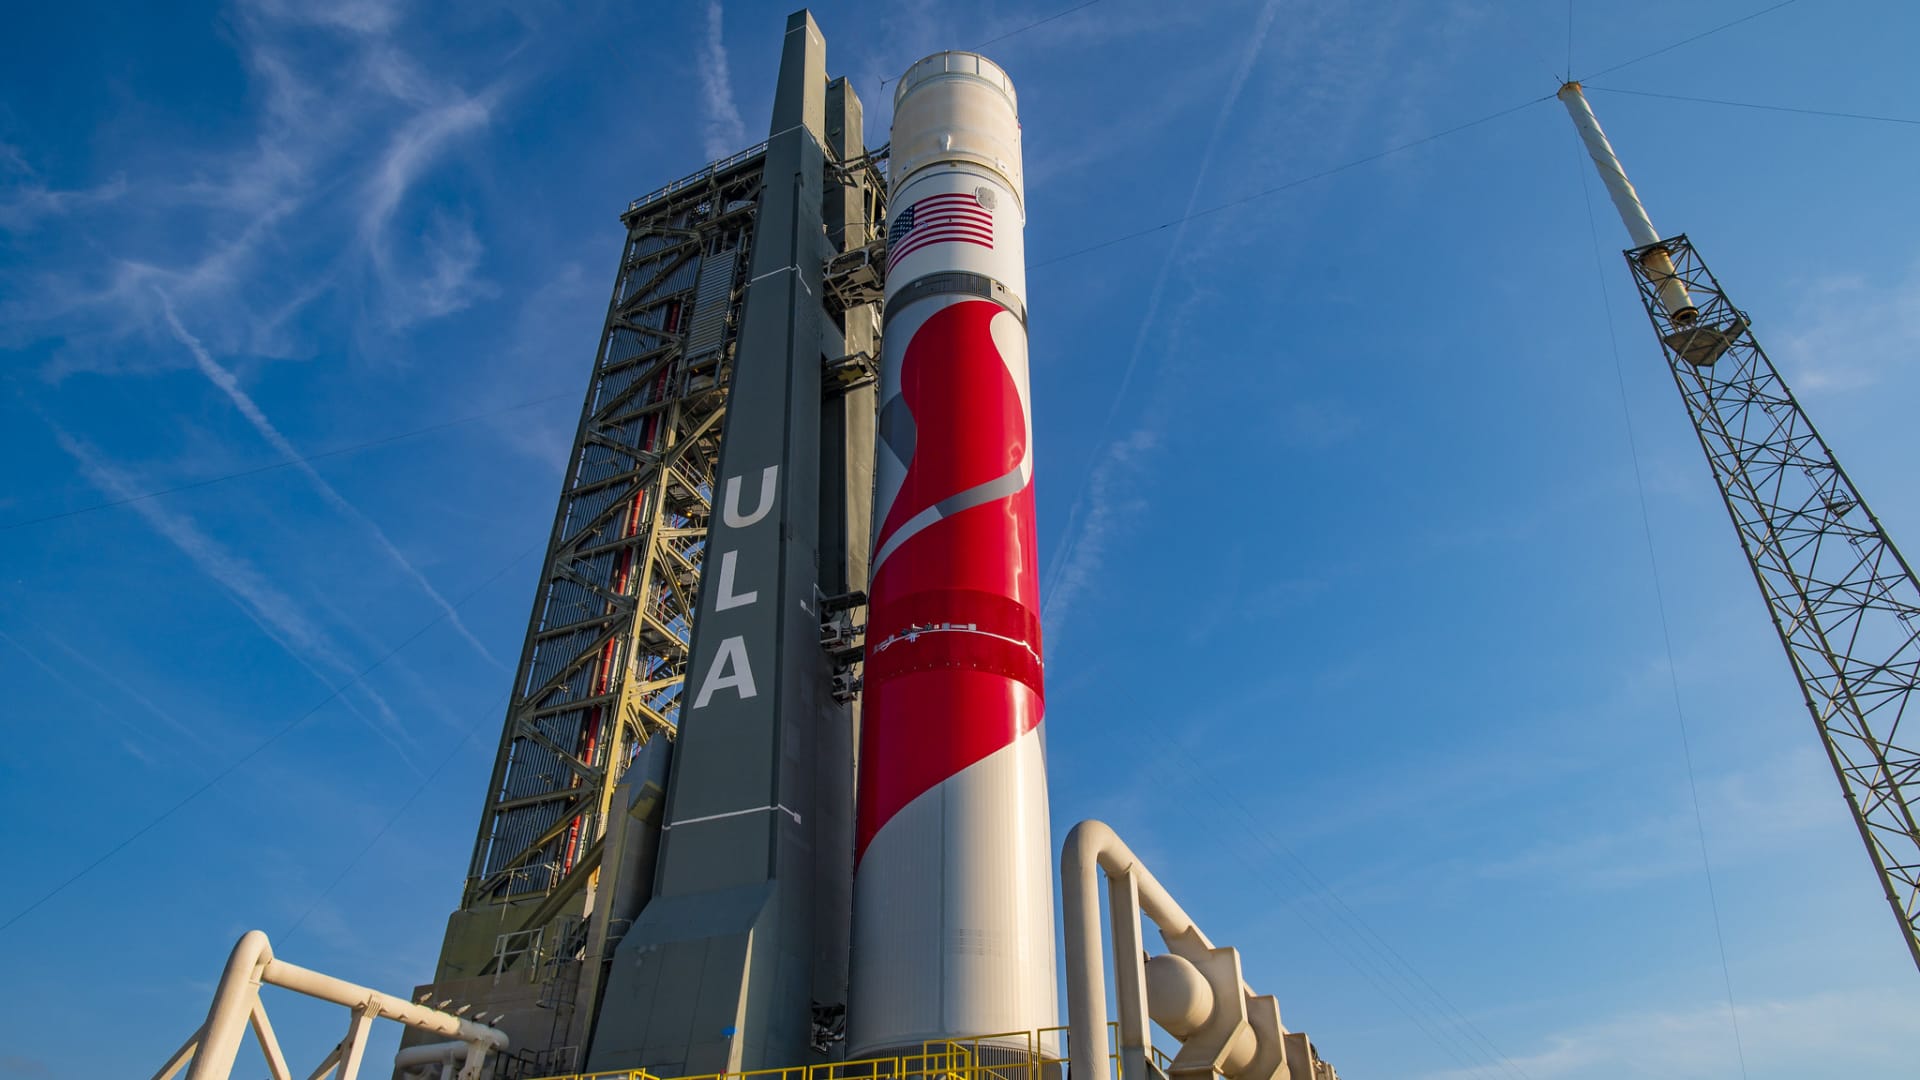 Inaugural Vulcan rocket launch slated for Christmas Eve